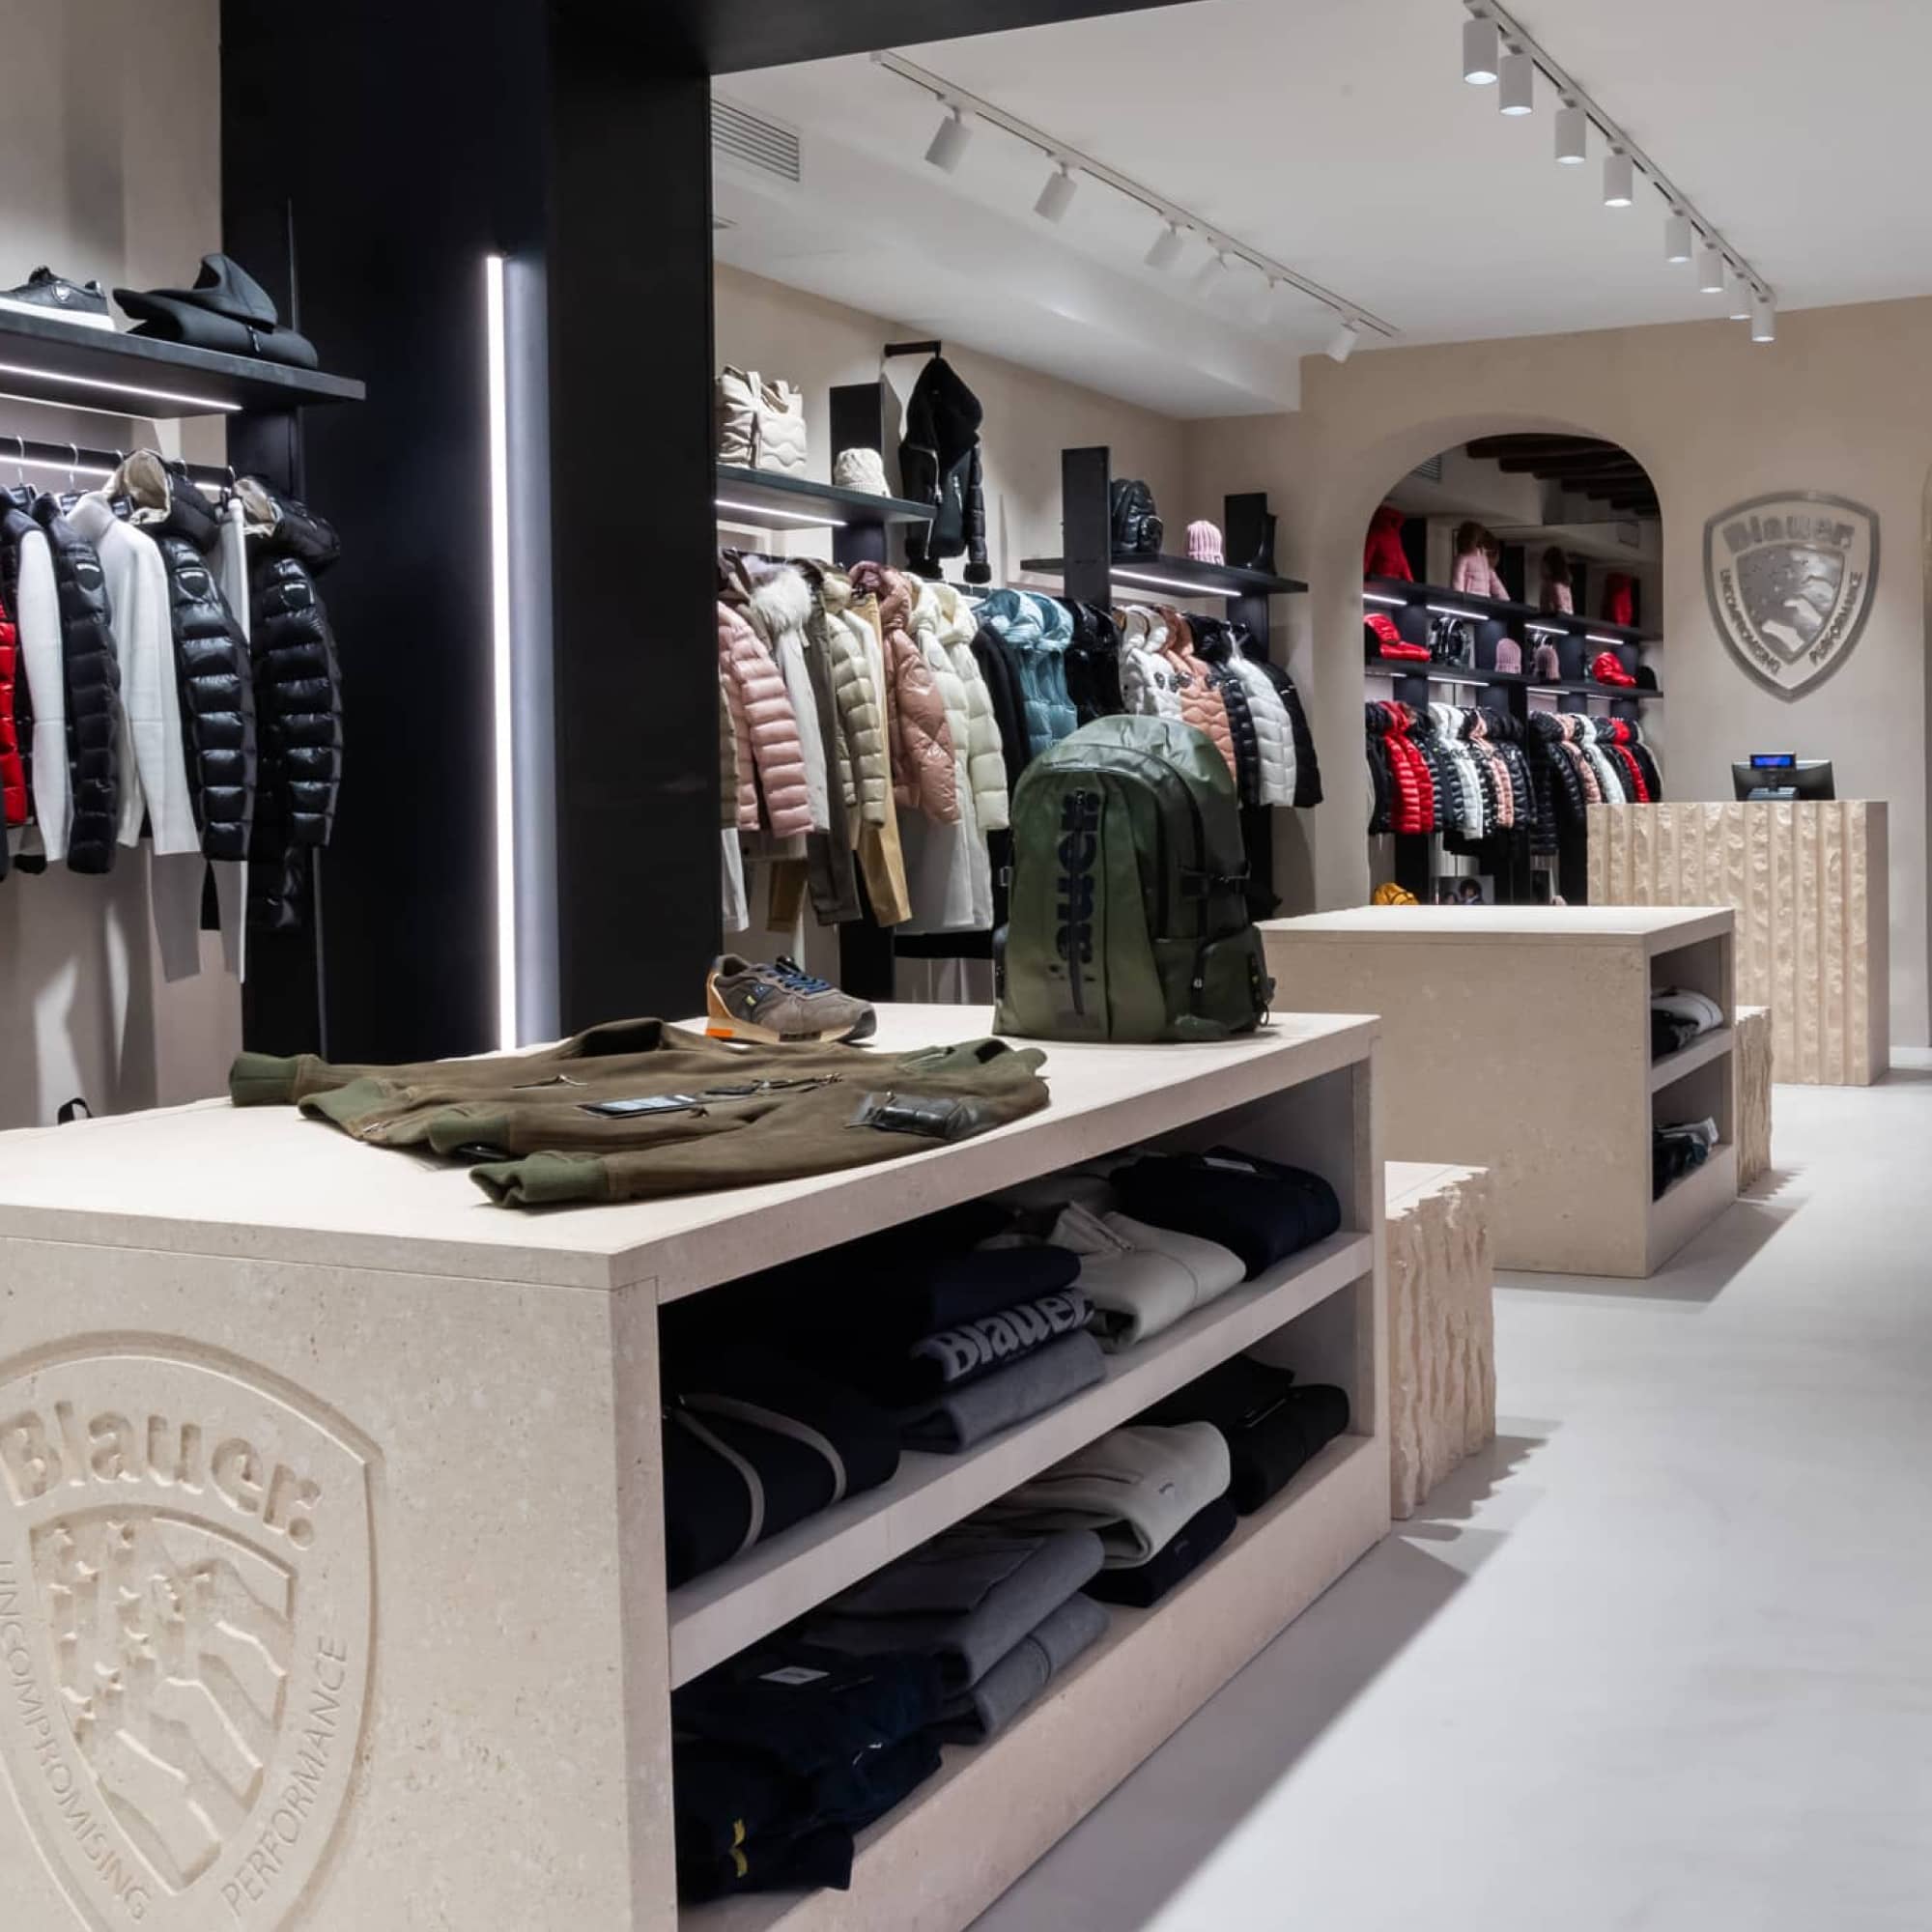 BLAUER opens its first store in Rome